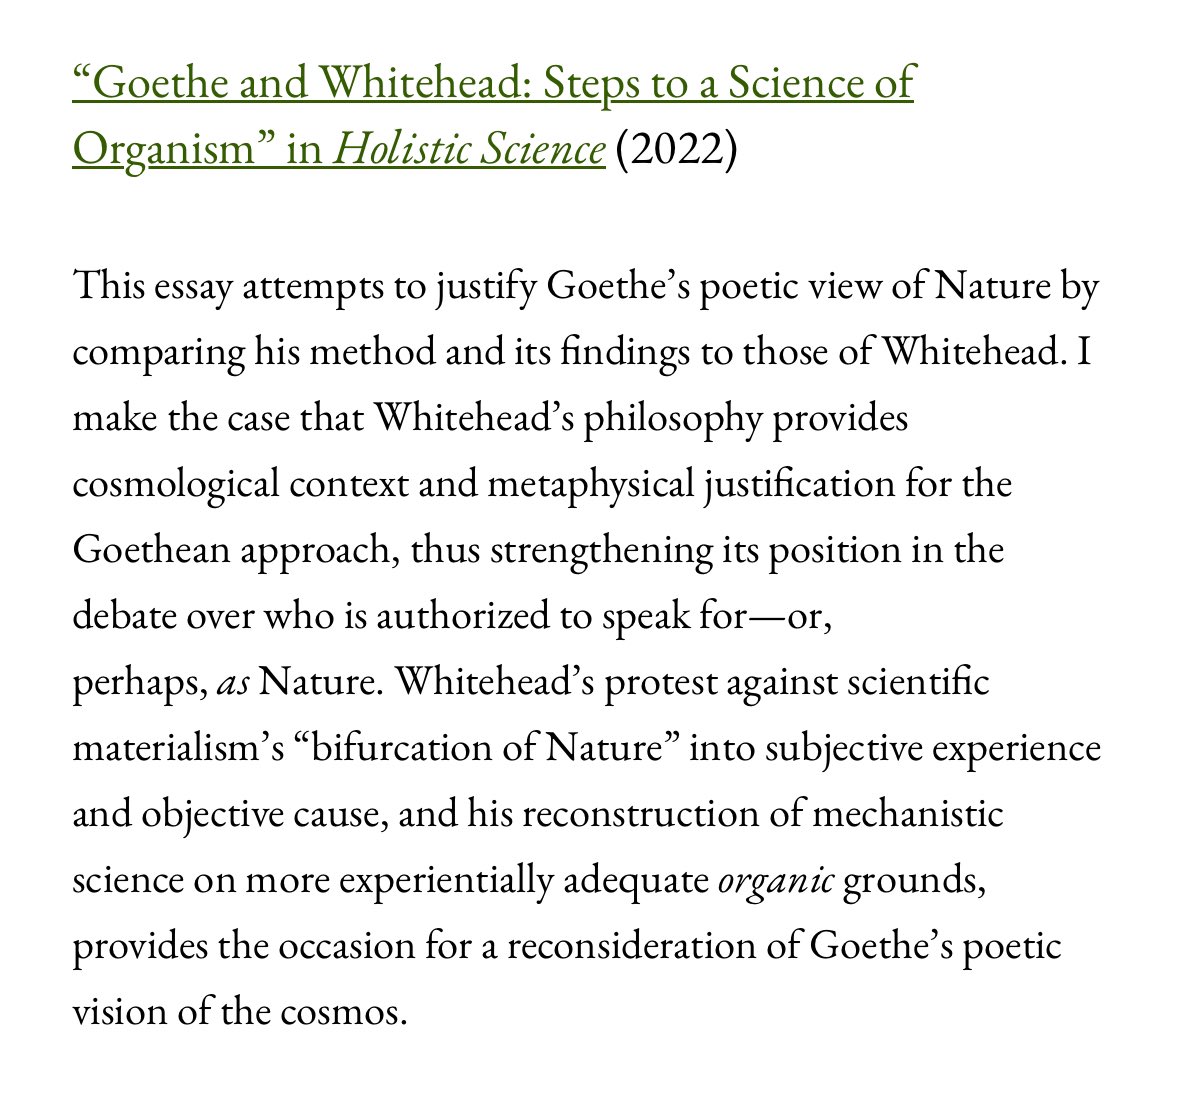 Whitehead should be understood as Goethe’s 20th century heir, as he provides the organic cosmology that justifies Goethe’s participatory scientific method. matthewsegall.files.wordpress.com/2022/12/goethe…